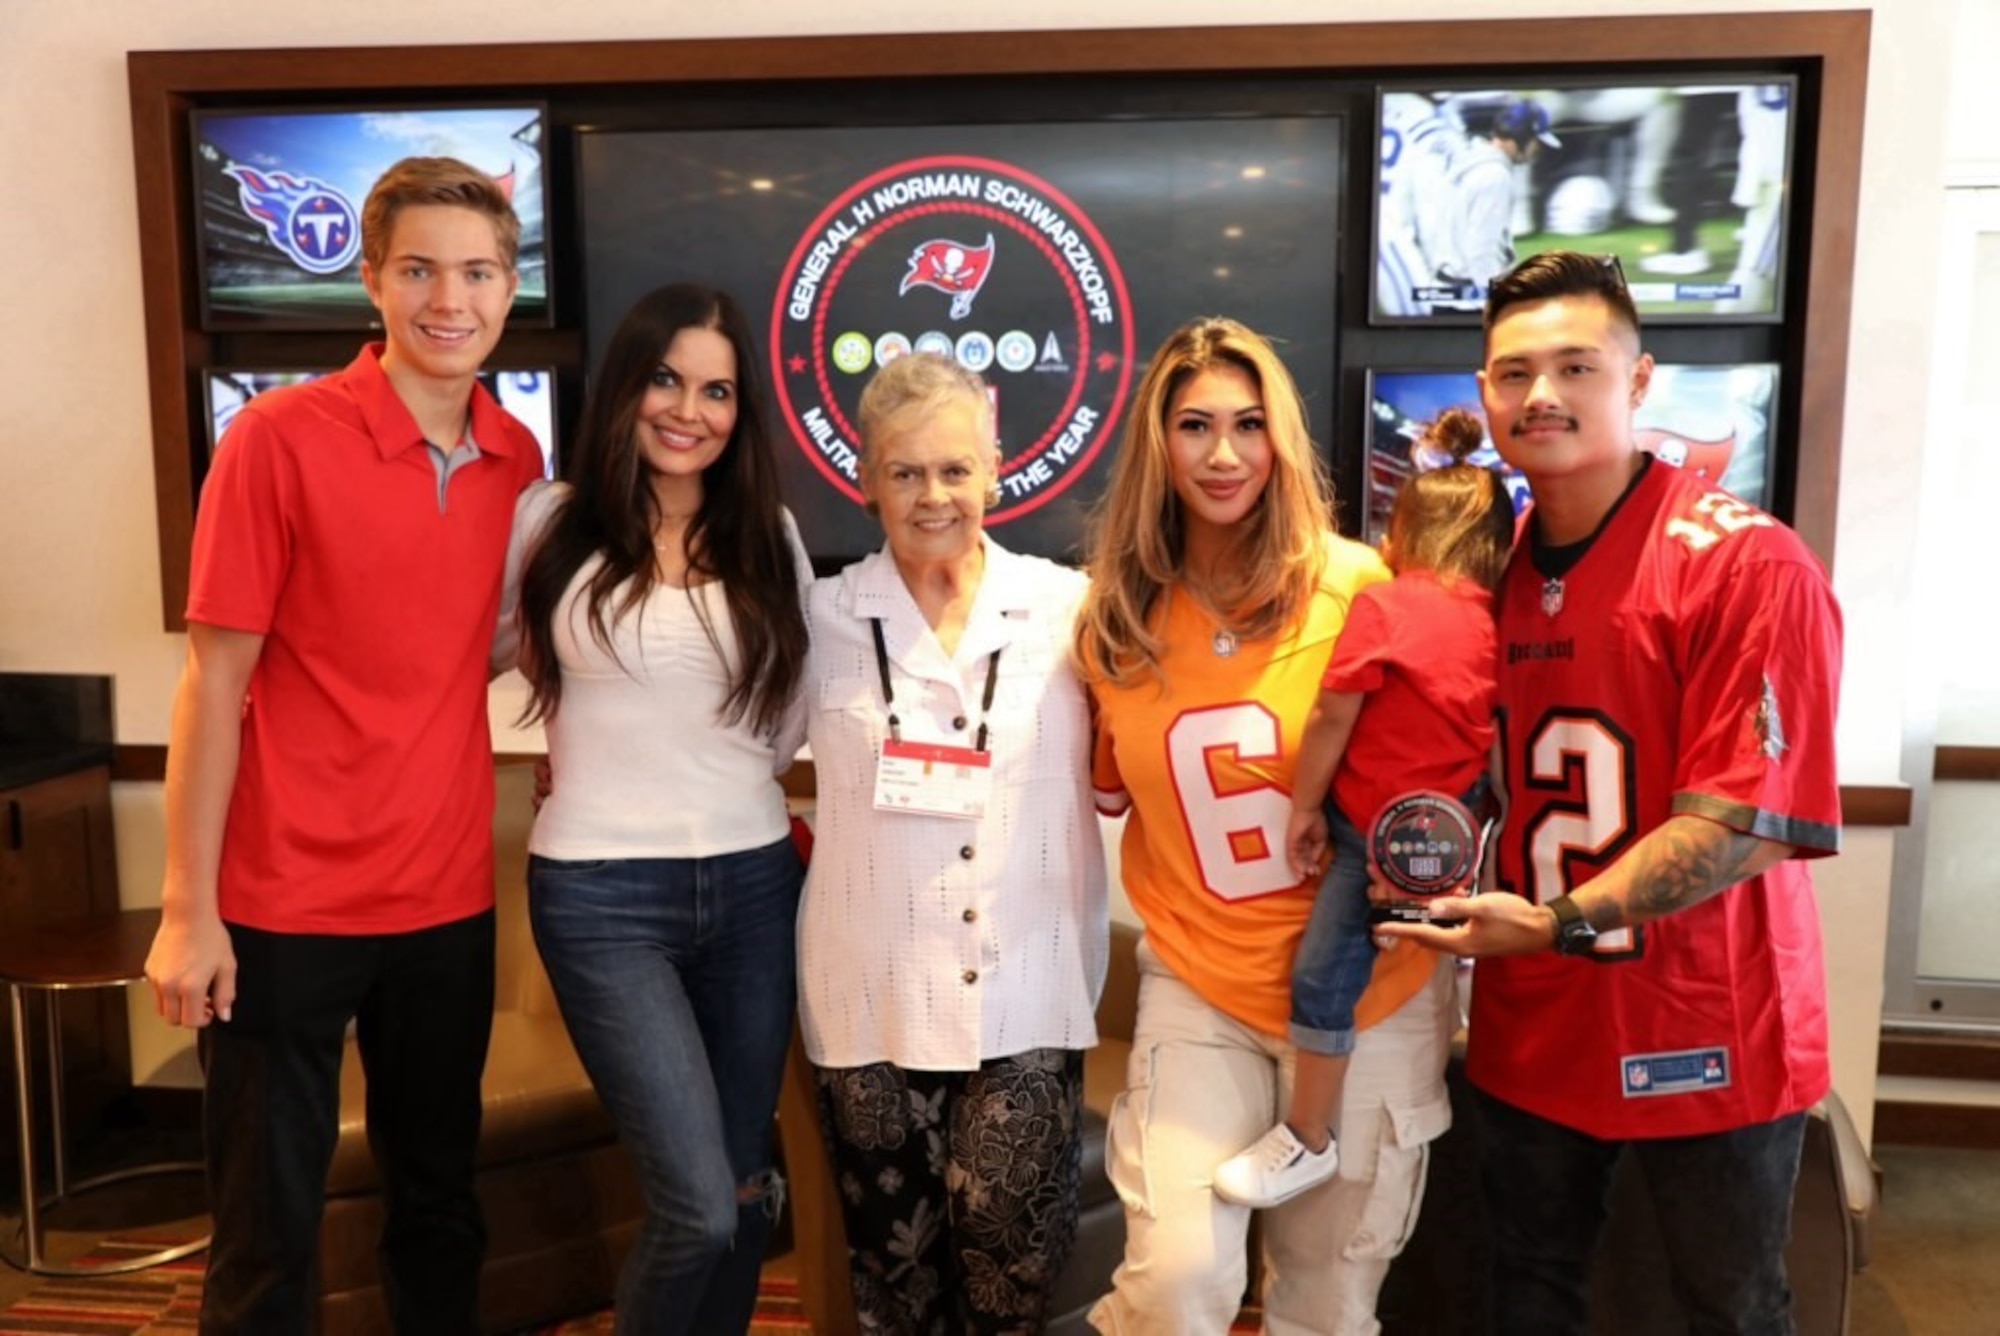 U.S. Air Force Staff Sgt. Jonne Cadua and his family pose with the families of U.S. Space Force Capt. Tiffany Crick and late U.S. Army Gen. Norman Schwarzkop in the Salute to Service Suite at Raymond James Stadium in Tampa, Florida.